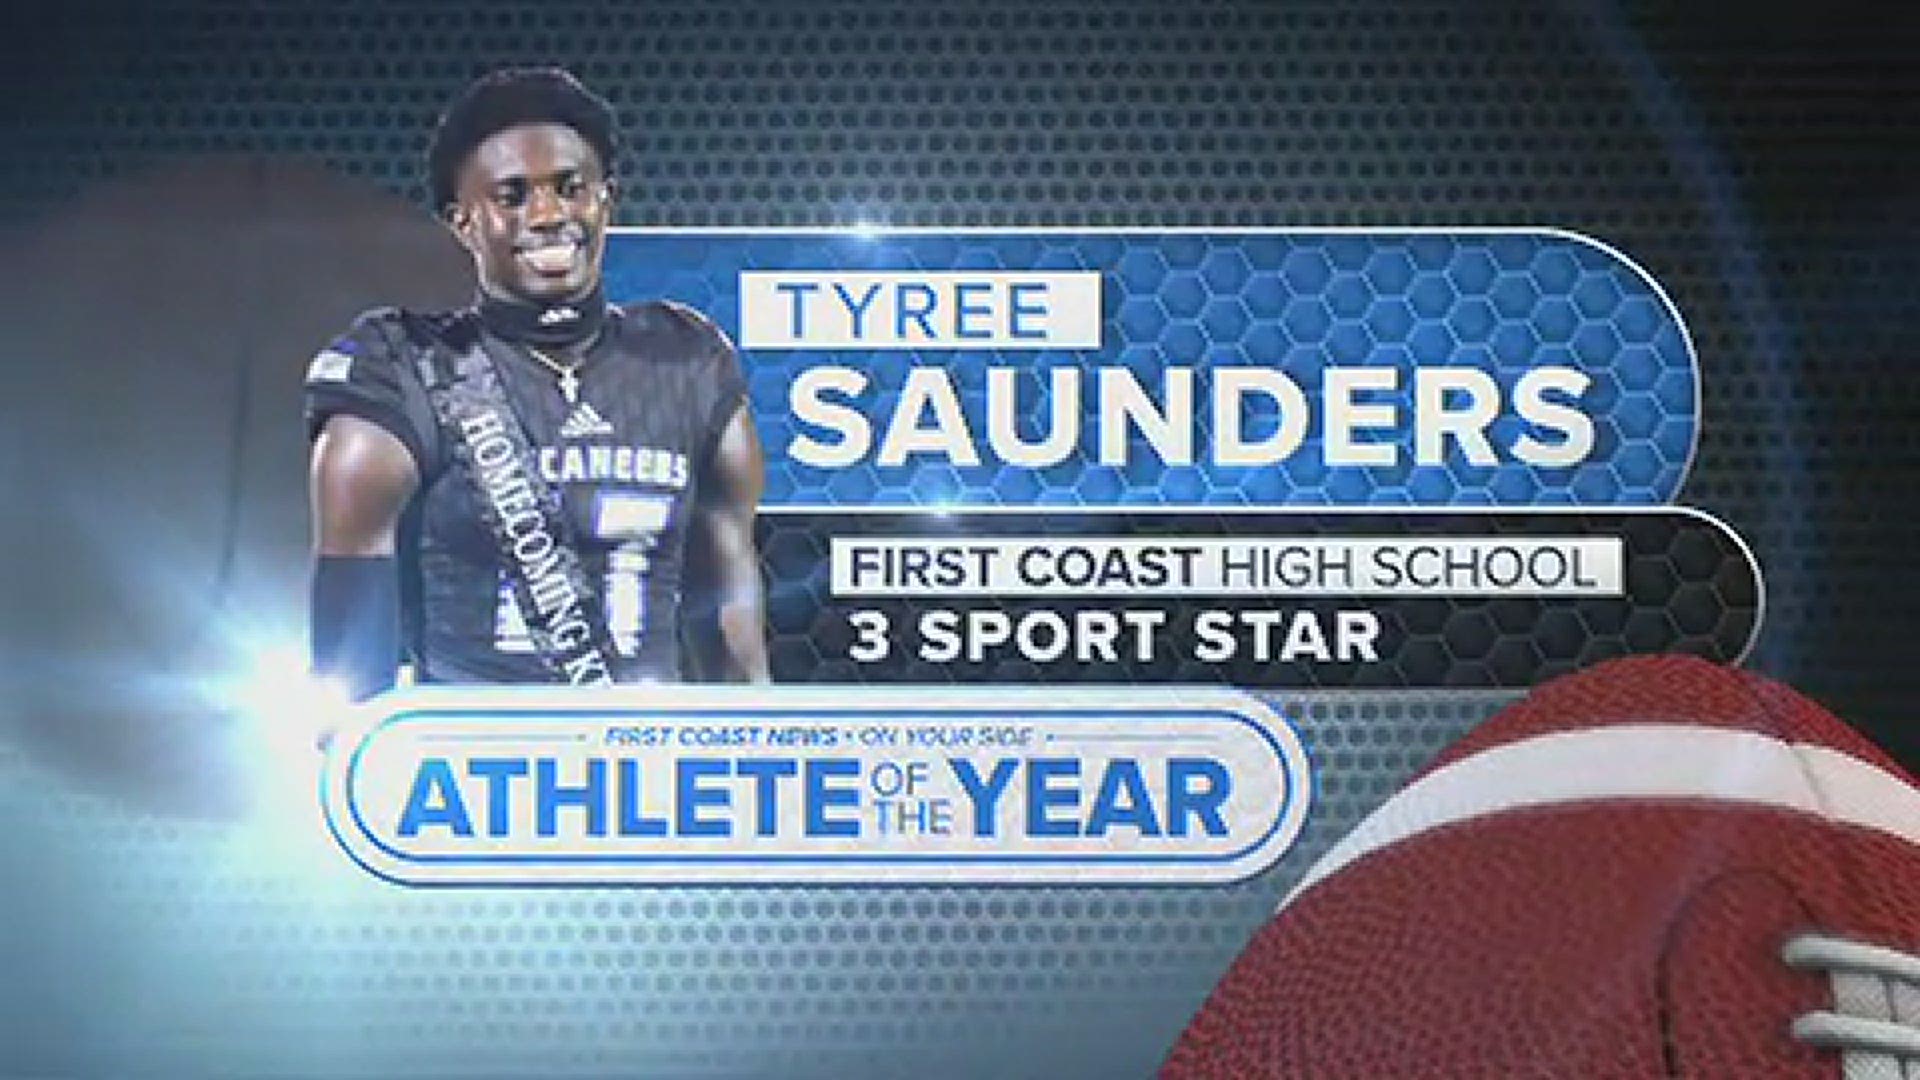 Our first nominee is Tyree Saunders, a three-sport stand-out from First Coast High School. Tyree is a 2019 State Champion in track and is headed to Virginia Tech.